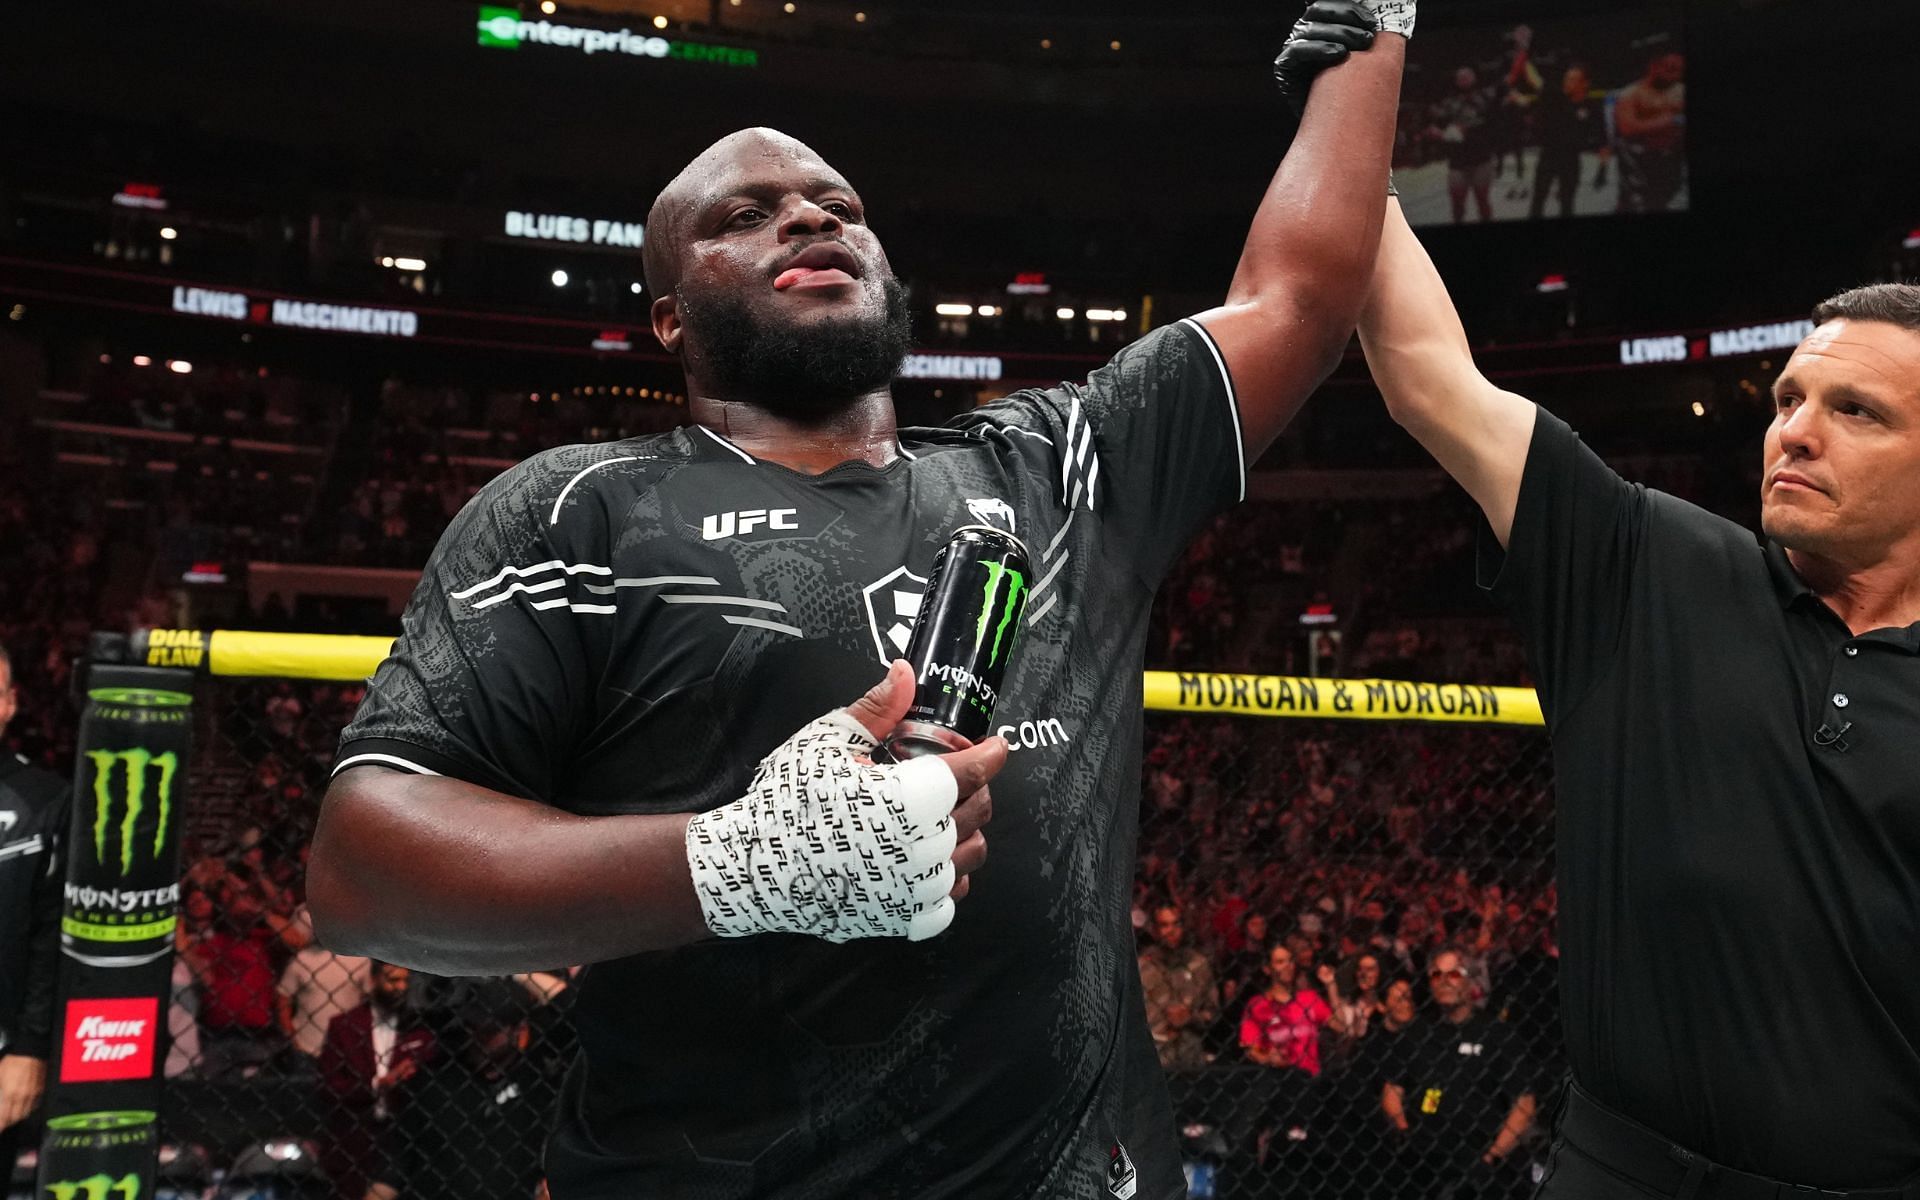 Derrick Lewis wrote another chapter into his unlikely legend last night